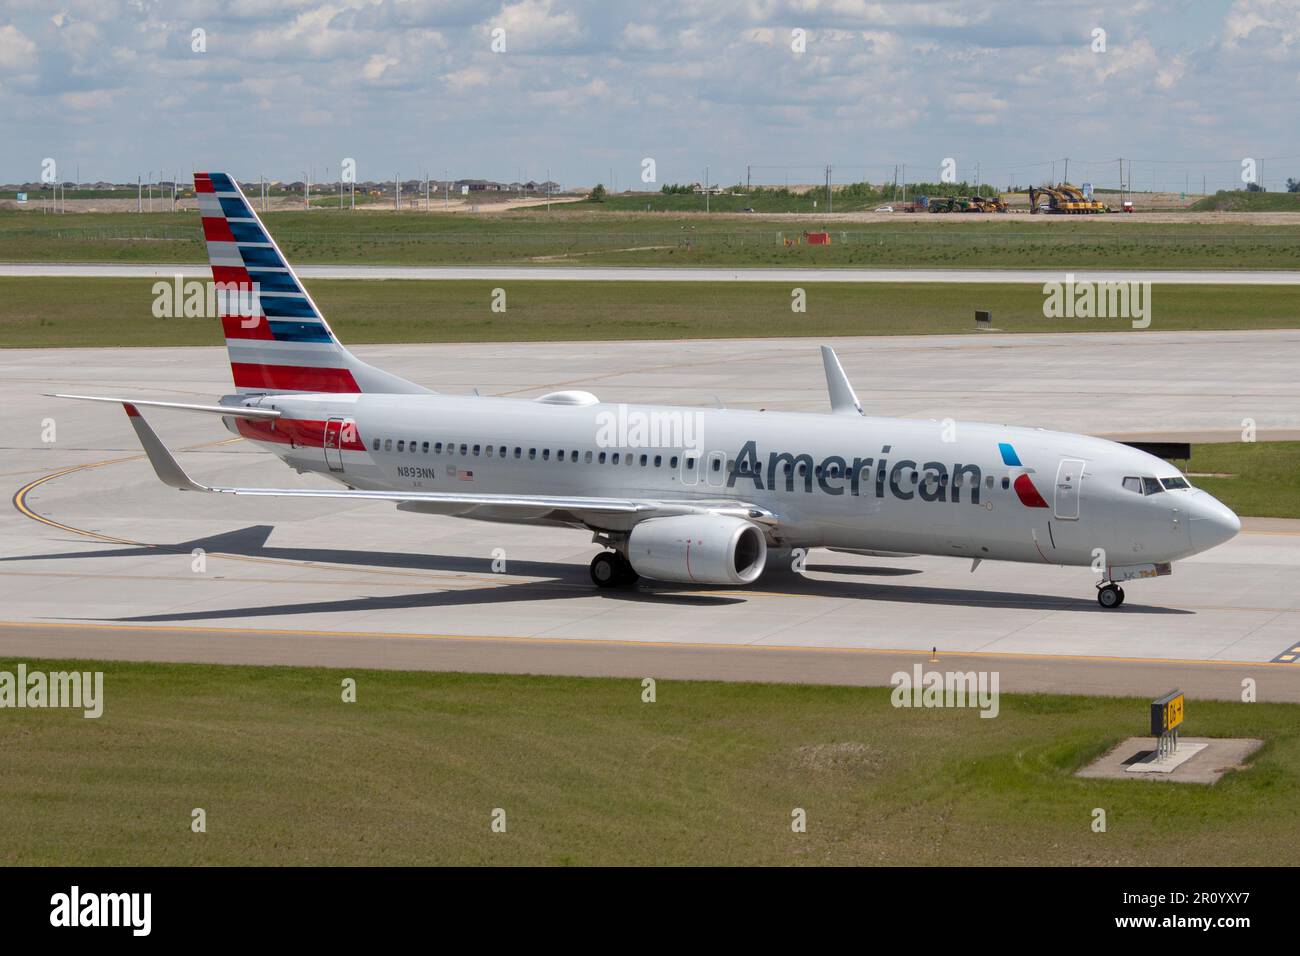 An American Airlines Boeing 737 arriving at Calgary International Airport Stock Photo